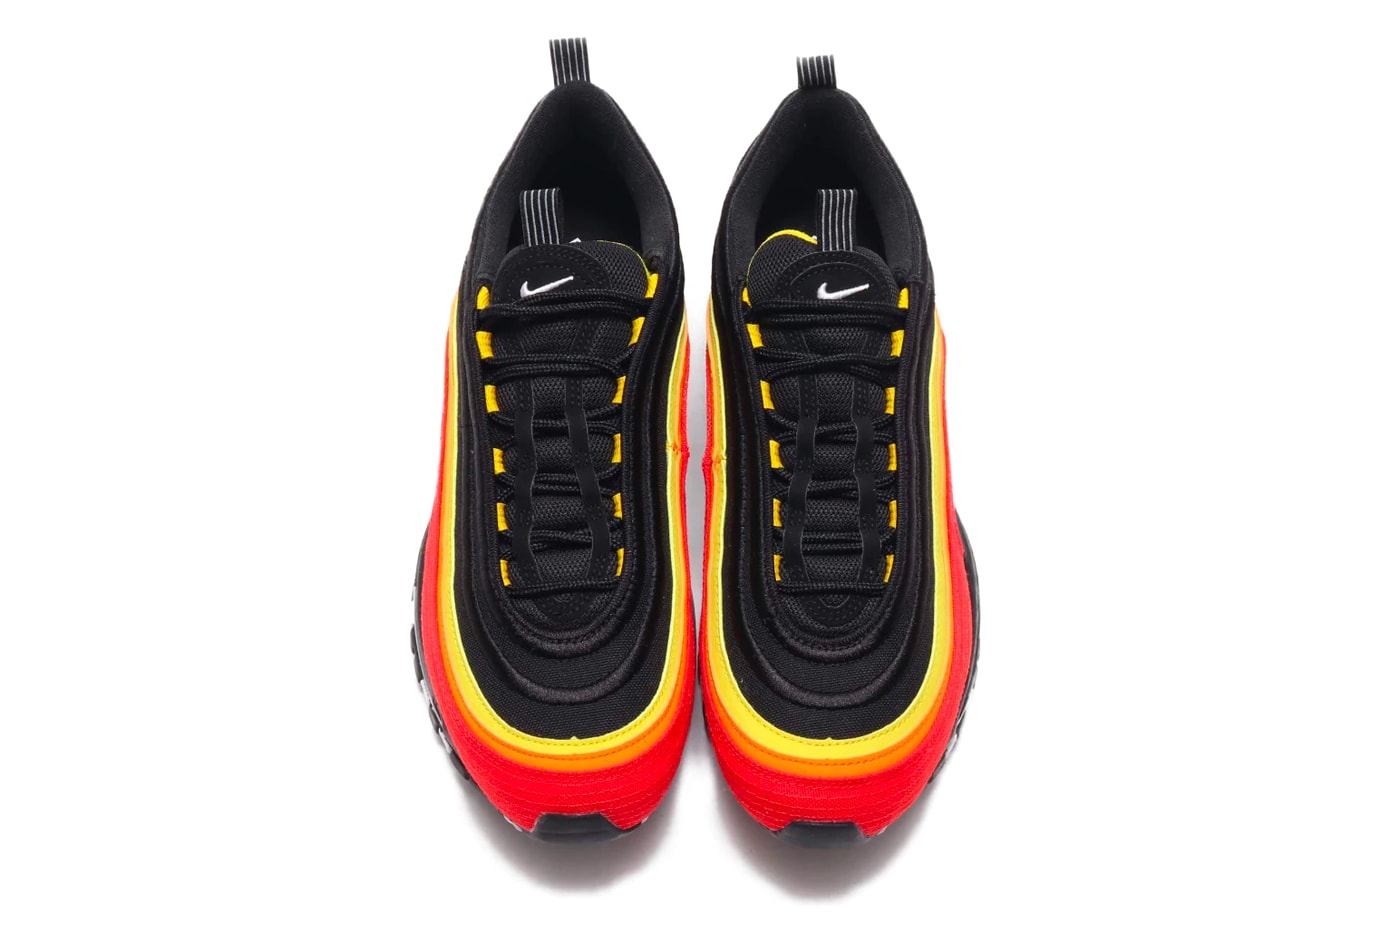 NIKE AIR MAX 97 QS BLACK WHITE CHILE RED MAGMA ORANGE spring summer 2020 collection menswear streetwear ct4525 001 shoes sneakers footwear kicks runners trainers